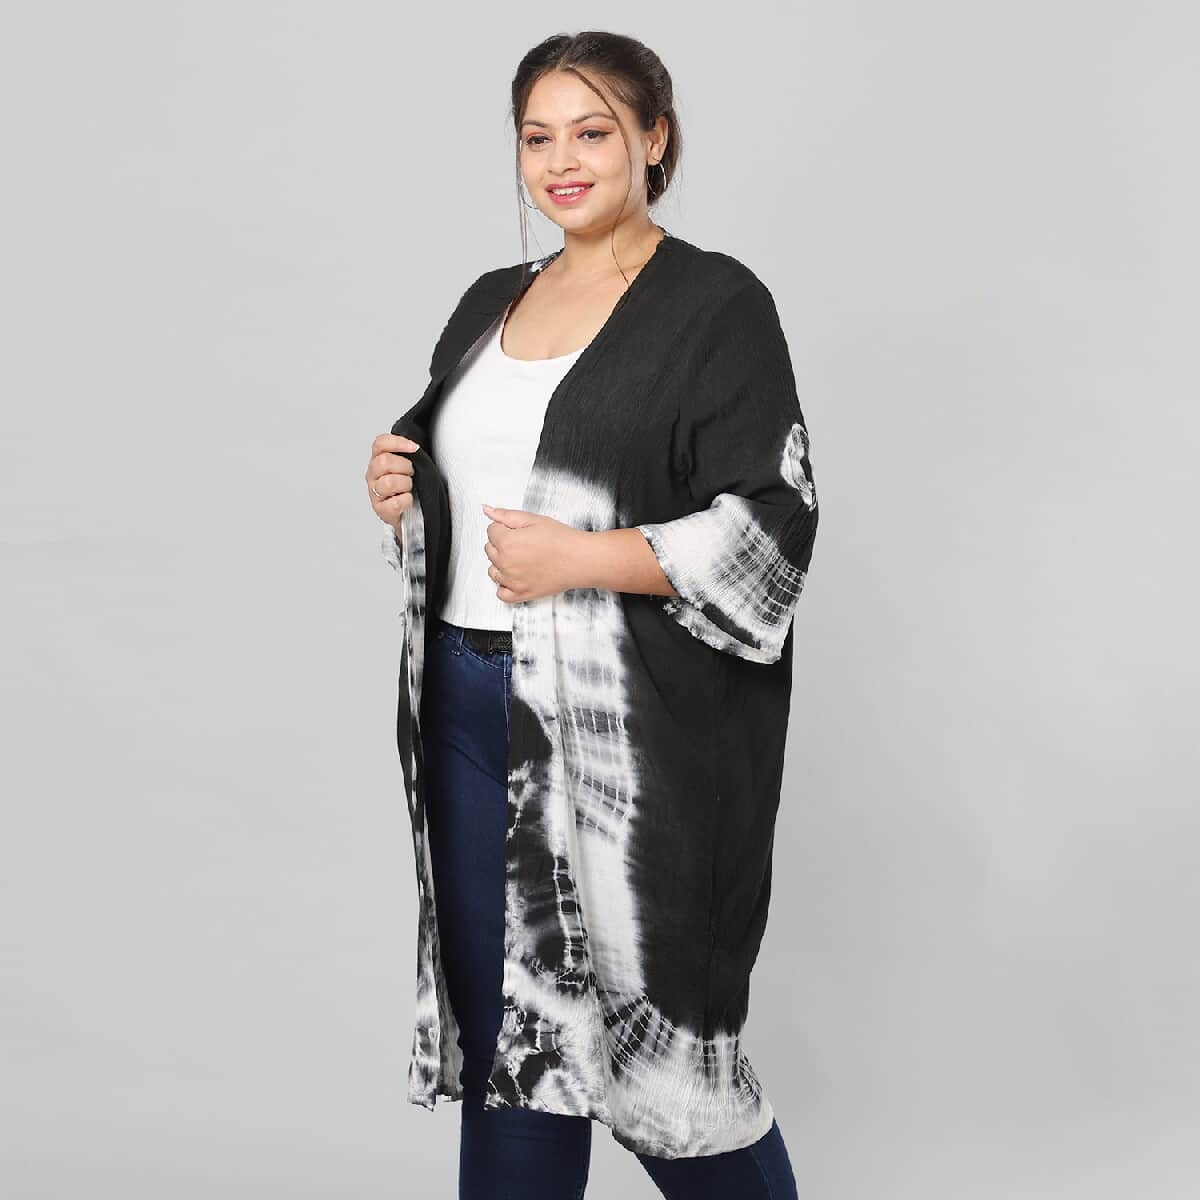 Black and White Tie Dye Kimono Duster with Bell Sleeves - One Size Fits Most image number 3